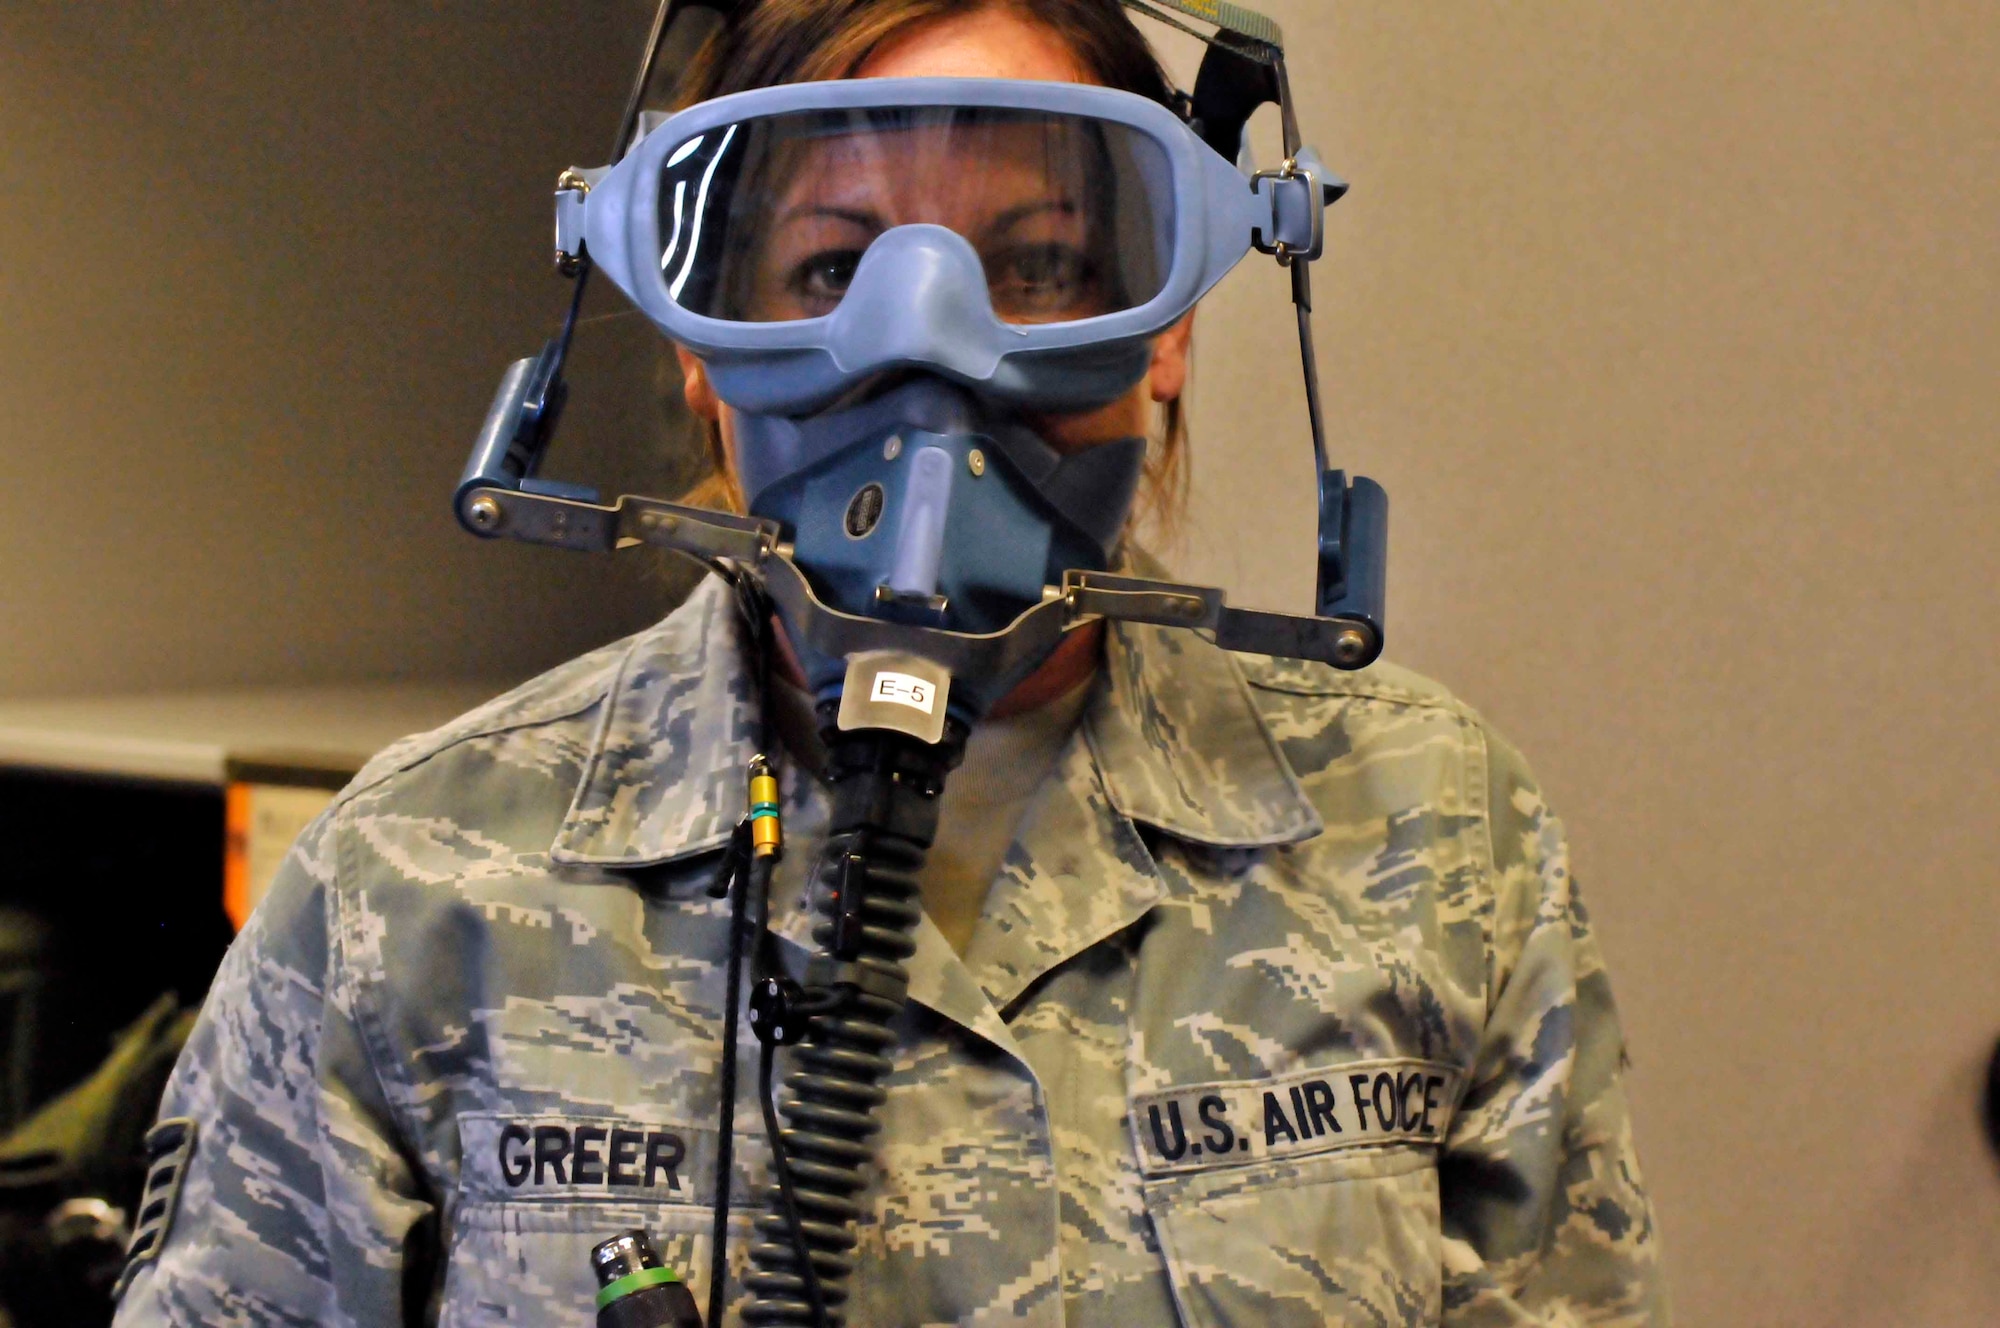 PATRICK AIR FORCE BASE, Fla. - Staff Sgt. Stacie Greer, aircrew flght equipment specialist, 920th Operations Support Squadron, puts on a smoke mask to test it following an aircrews' performance during the Cocoa Beach Air Show Nov. 4-5. AFE specialists are required to test and check all life support equipment before and after each flight. (U.S. Air Force Photo/Capt. Ryan Liss)